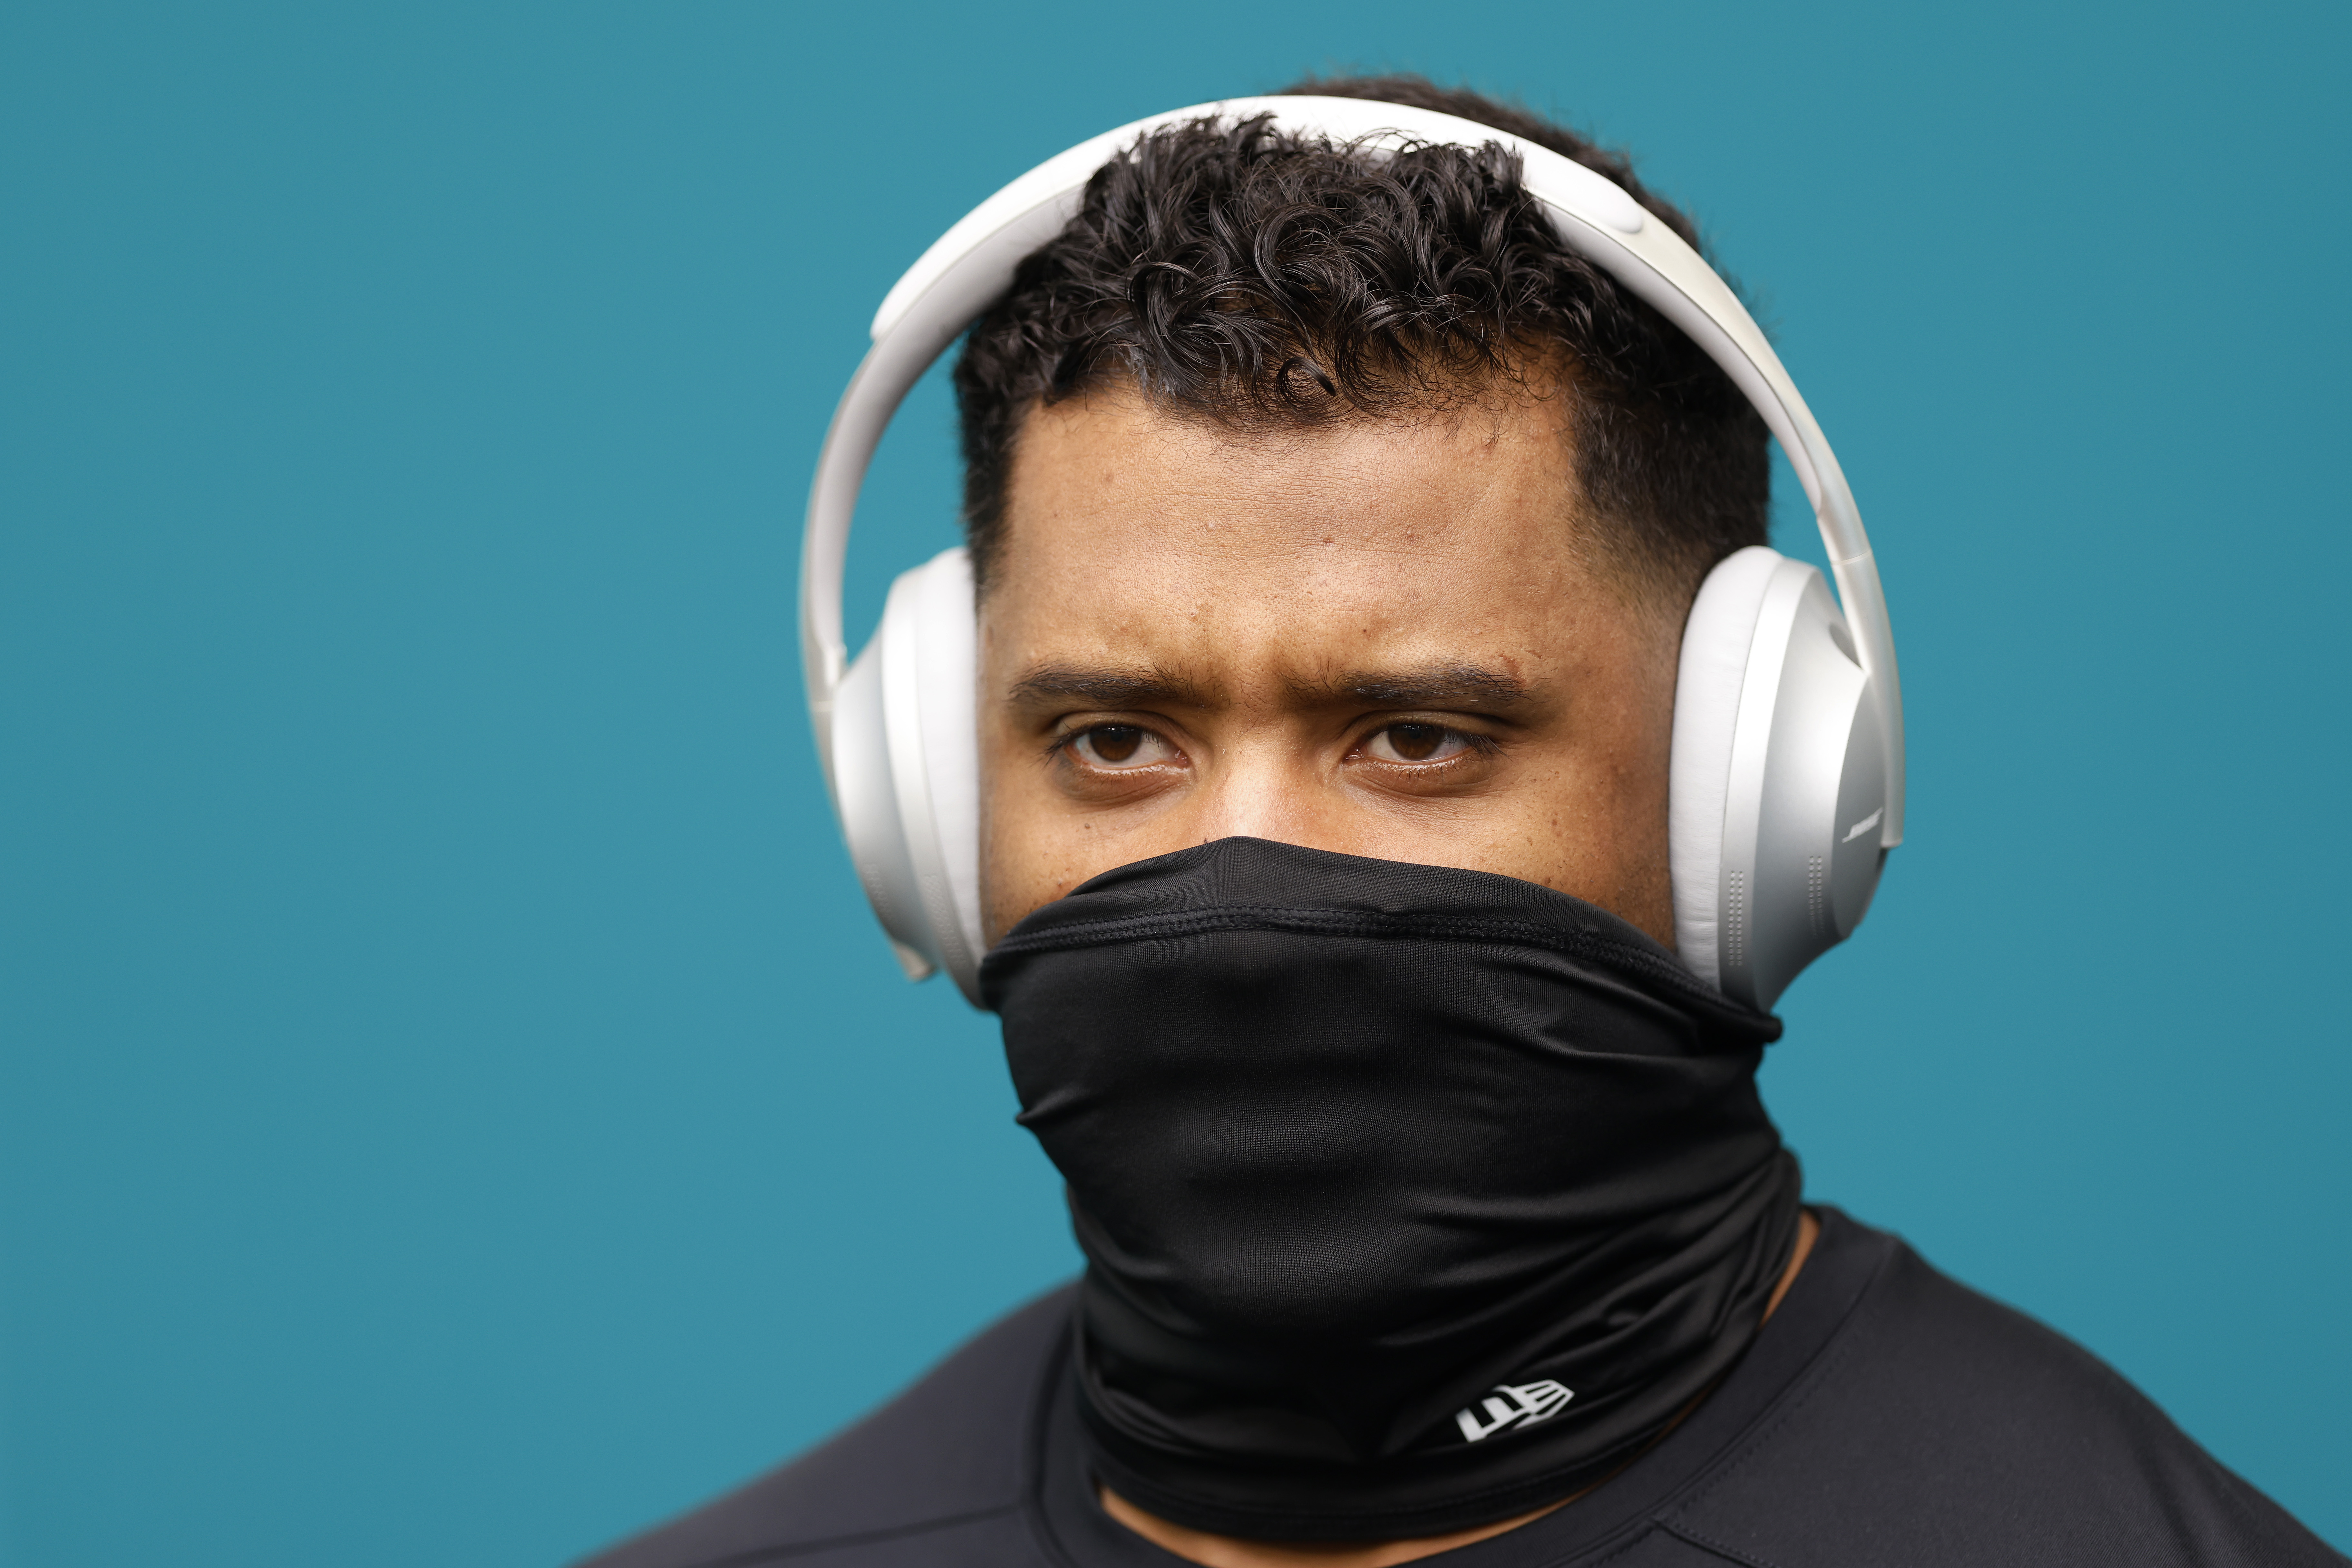 Russell Wilson Compares His Successful Seahawks Career to 10,000 Light Bulbs: ‘Winning Is a Habit’